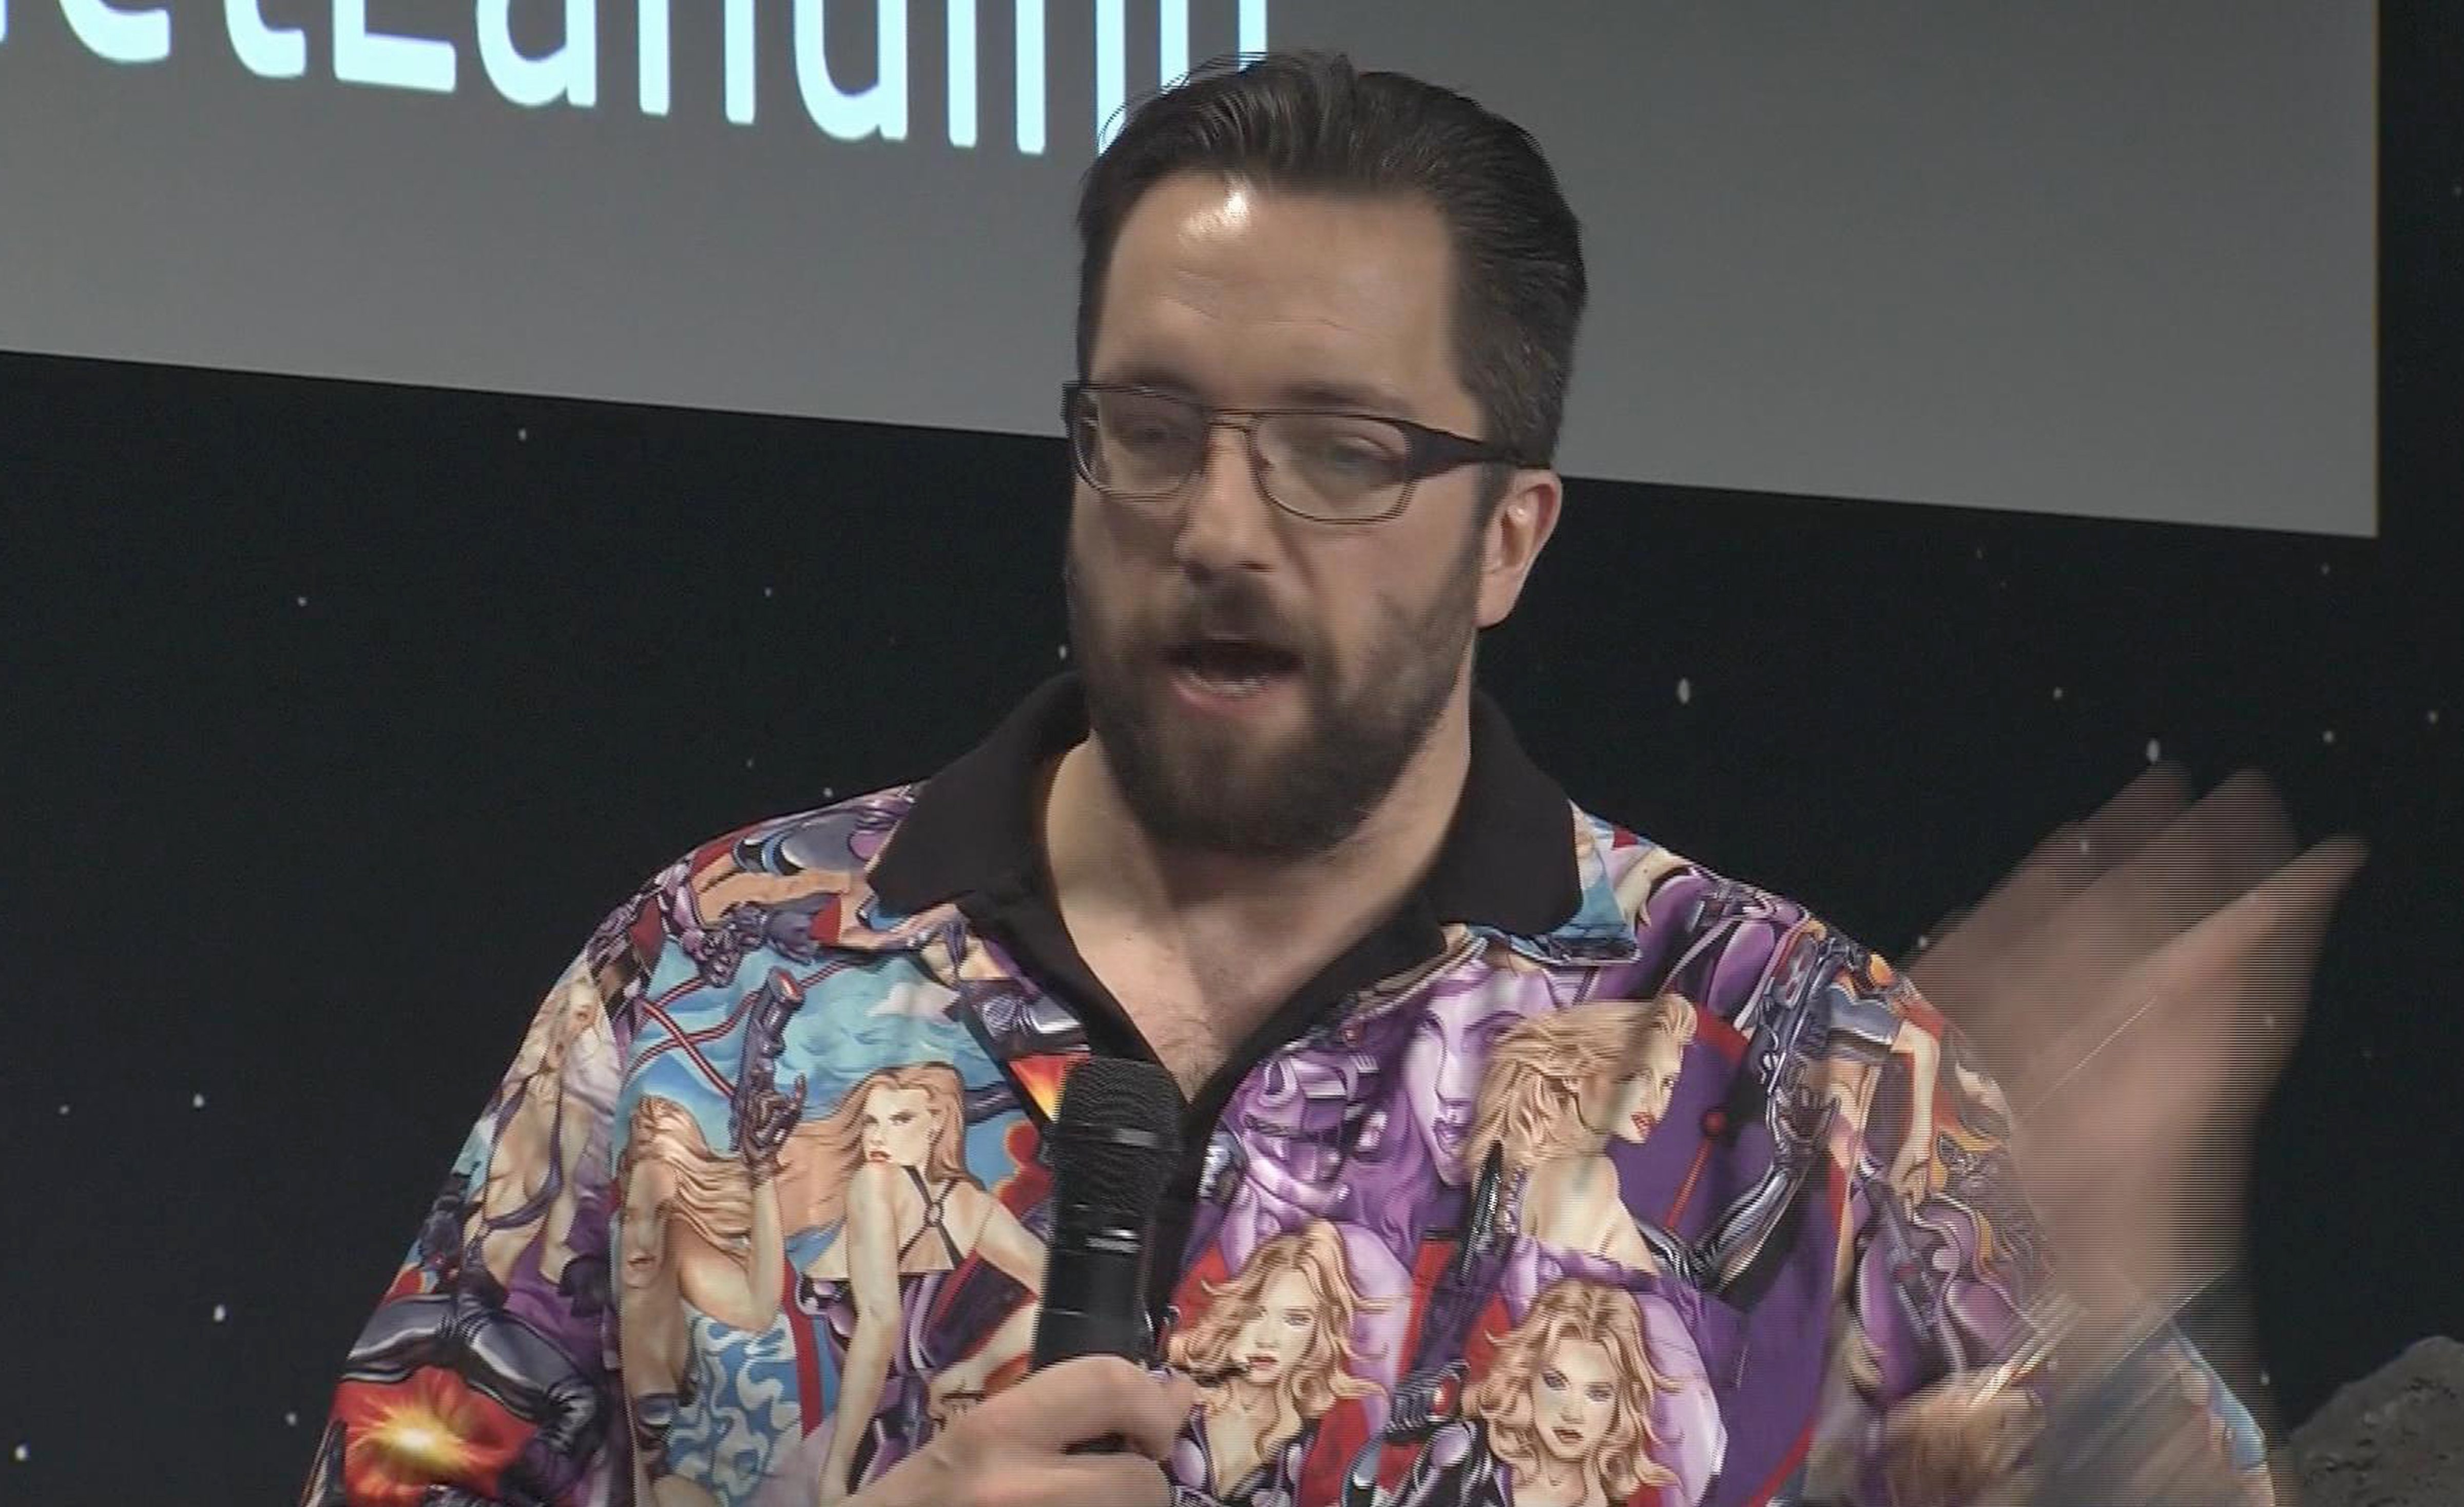 British physicist Matt Taylor sporting a garish shirt featuring a collage of pin-up girls during an interview at the satellite control centre of the European Space Agency in Darmstadt, Germany on Nov. 13, 2014. (AP)